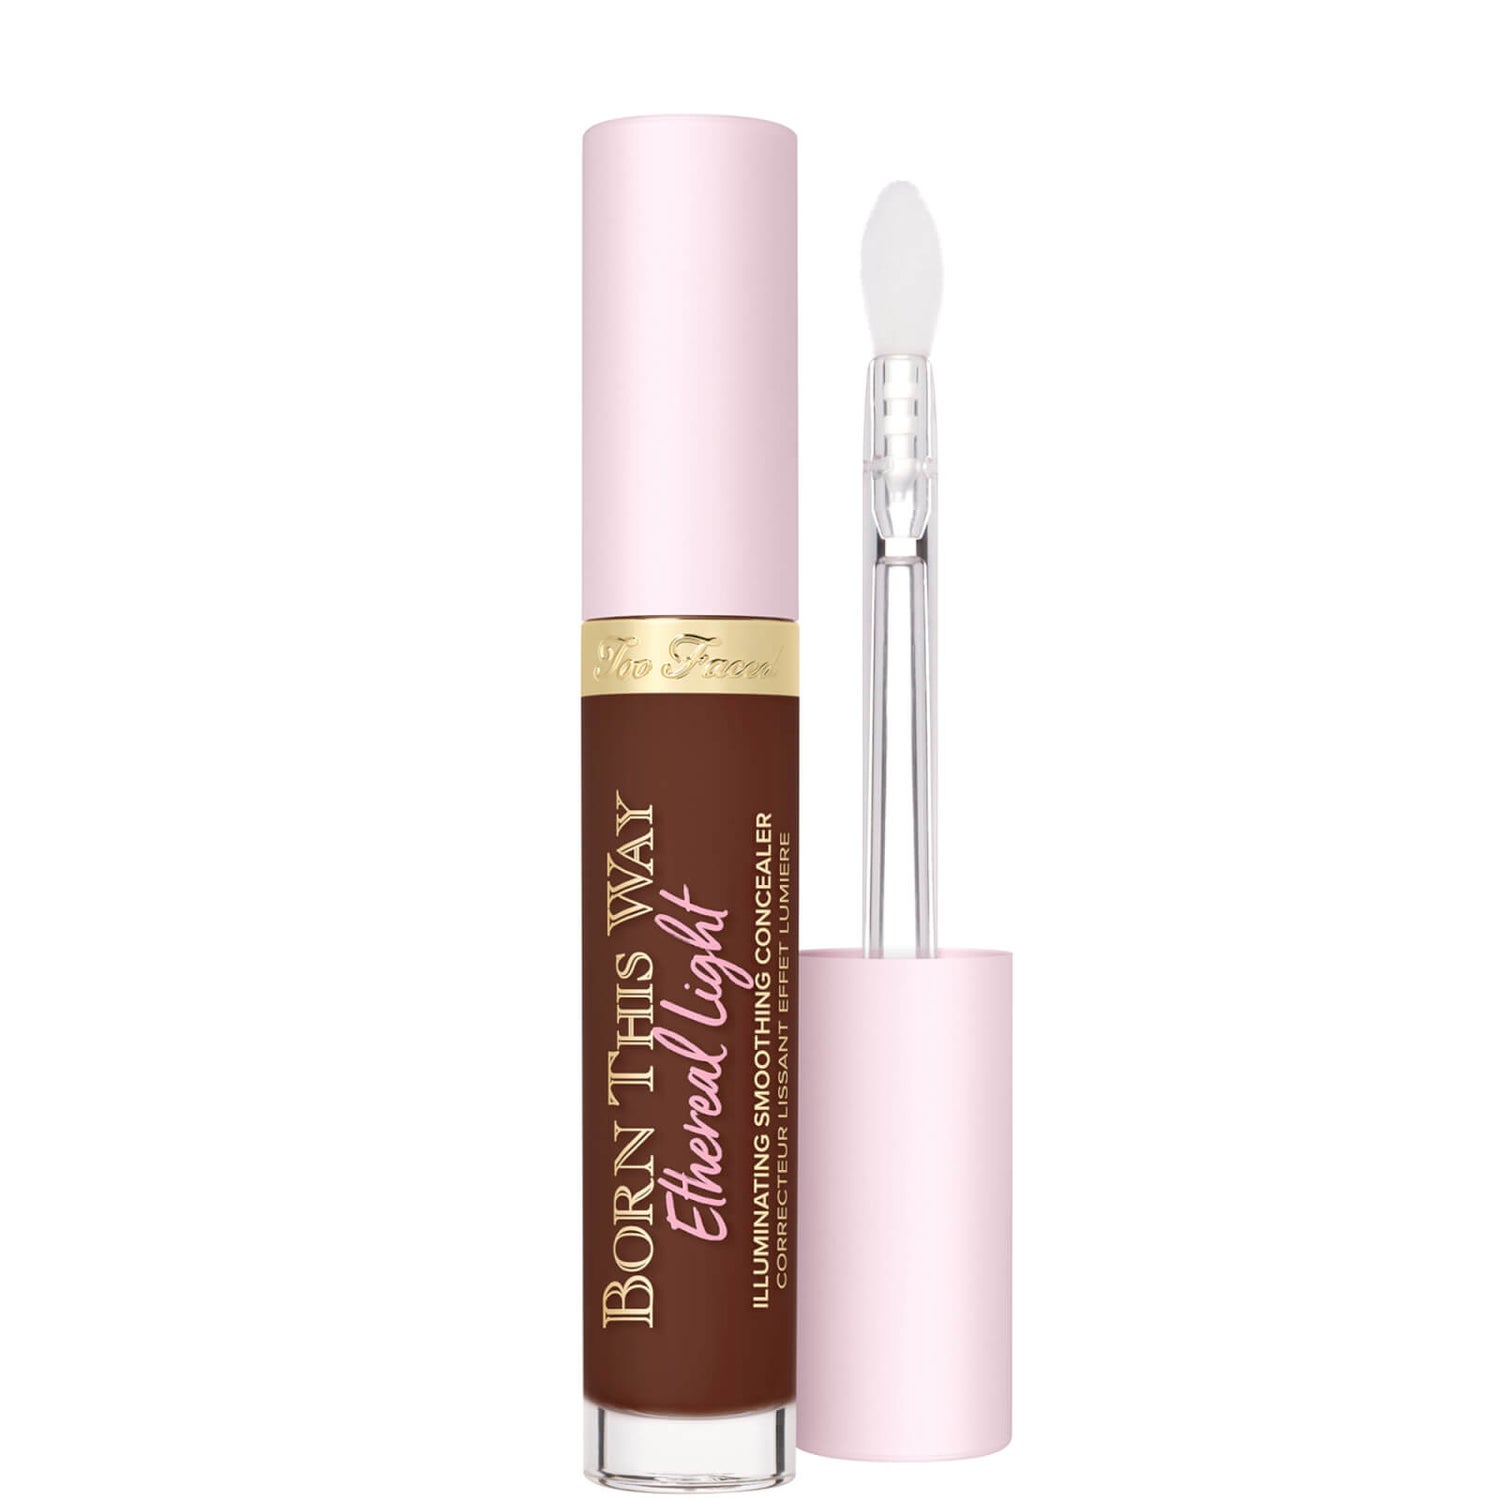 Too Faced Born This Way Ethereal Light Illuminating Smoothing Concealer 15ml (Various Shades)